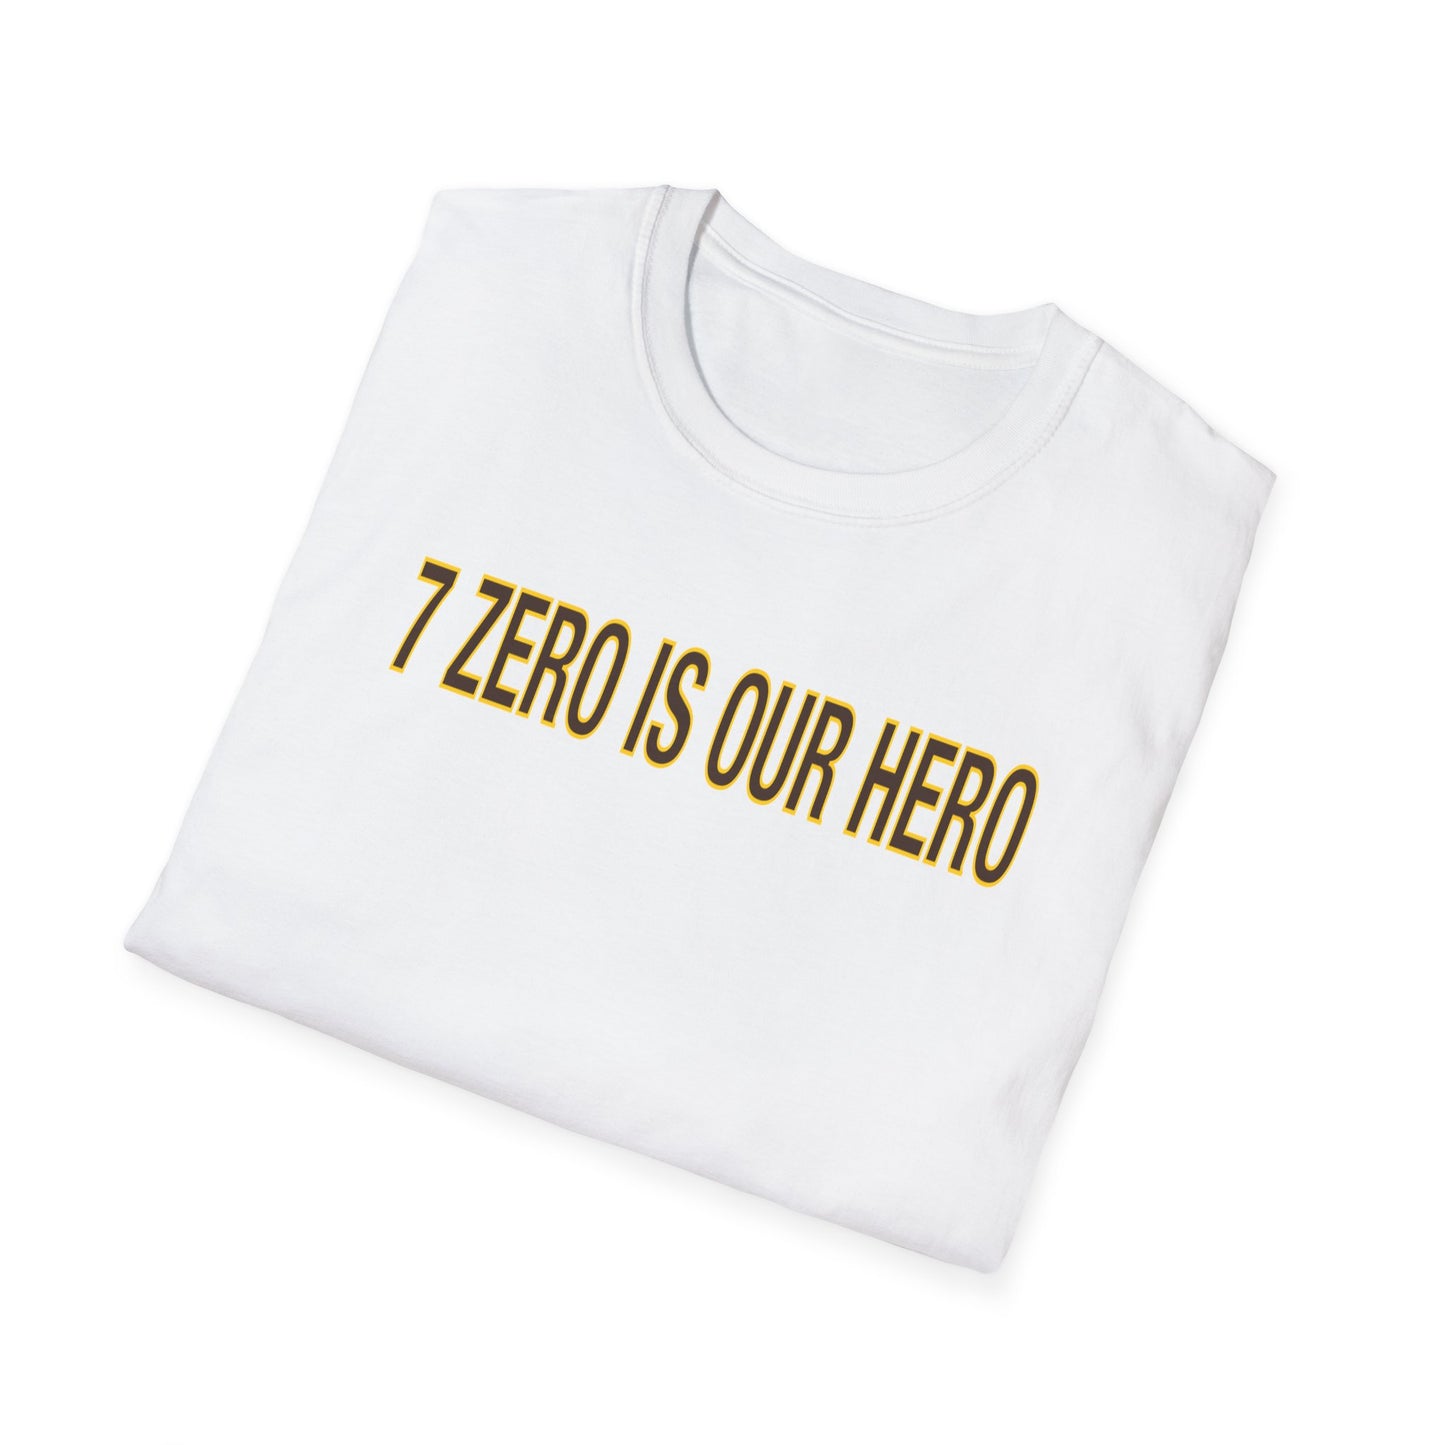 7 Zero is Our Hero With Johnson on the Back